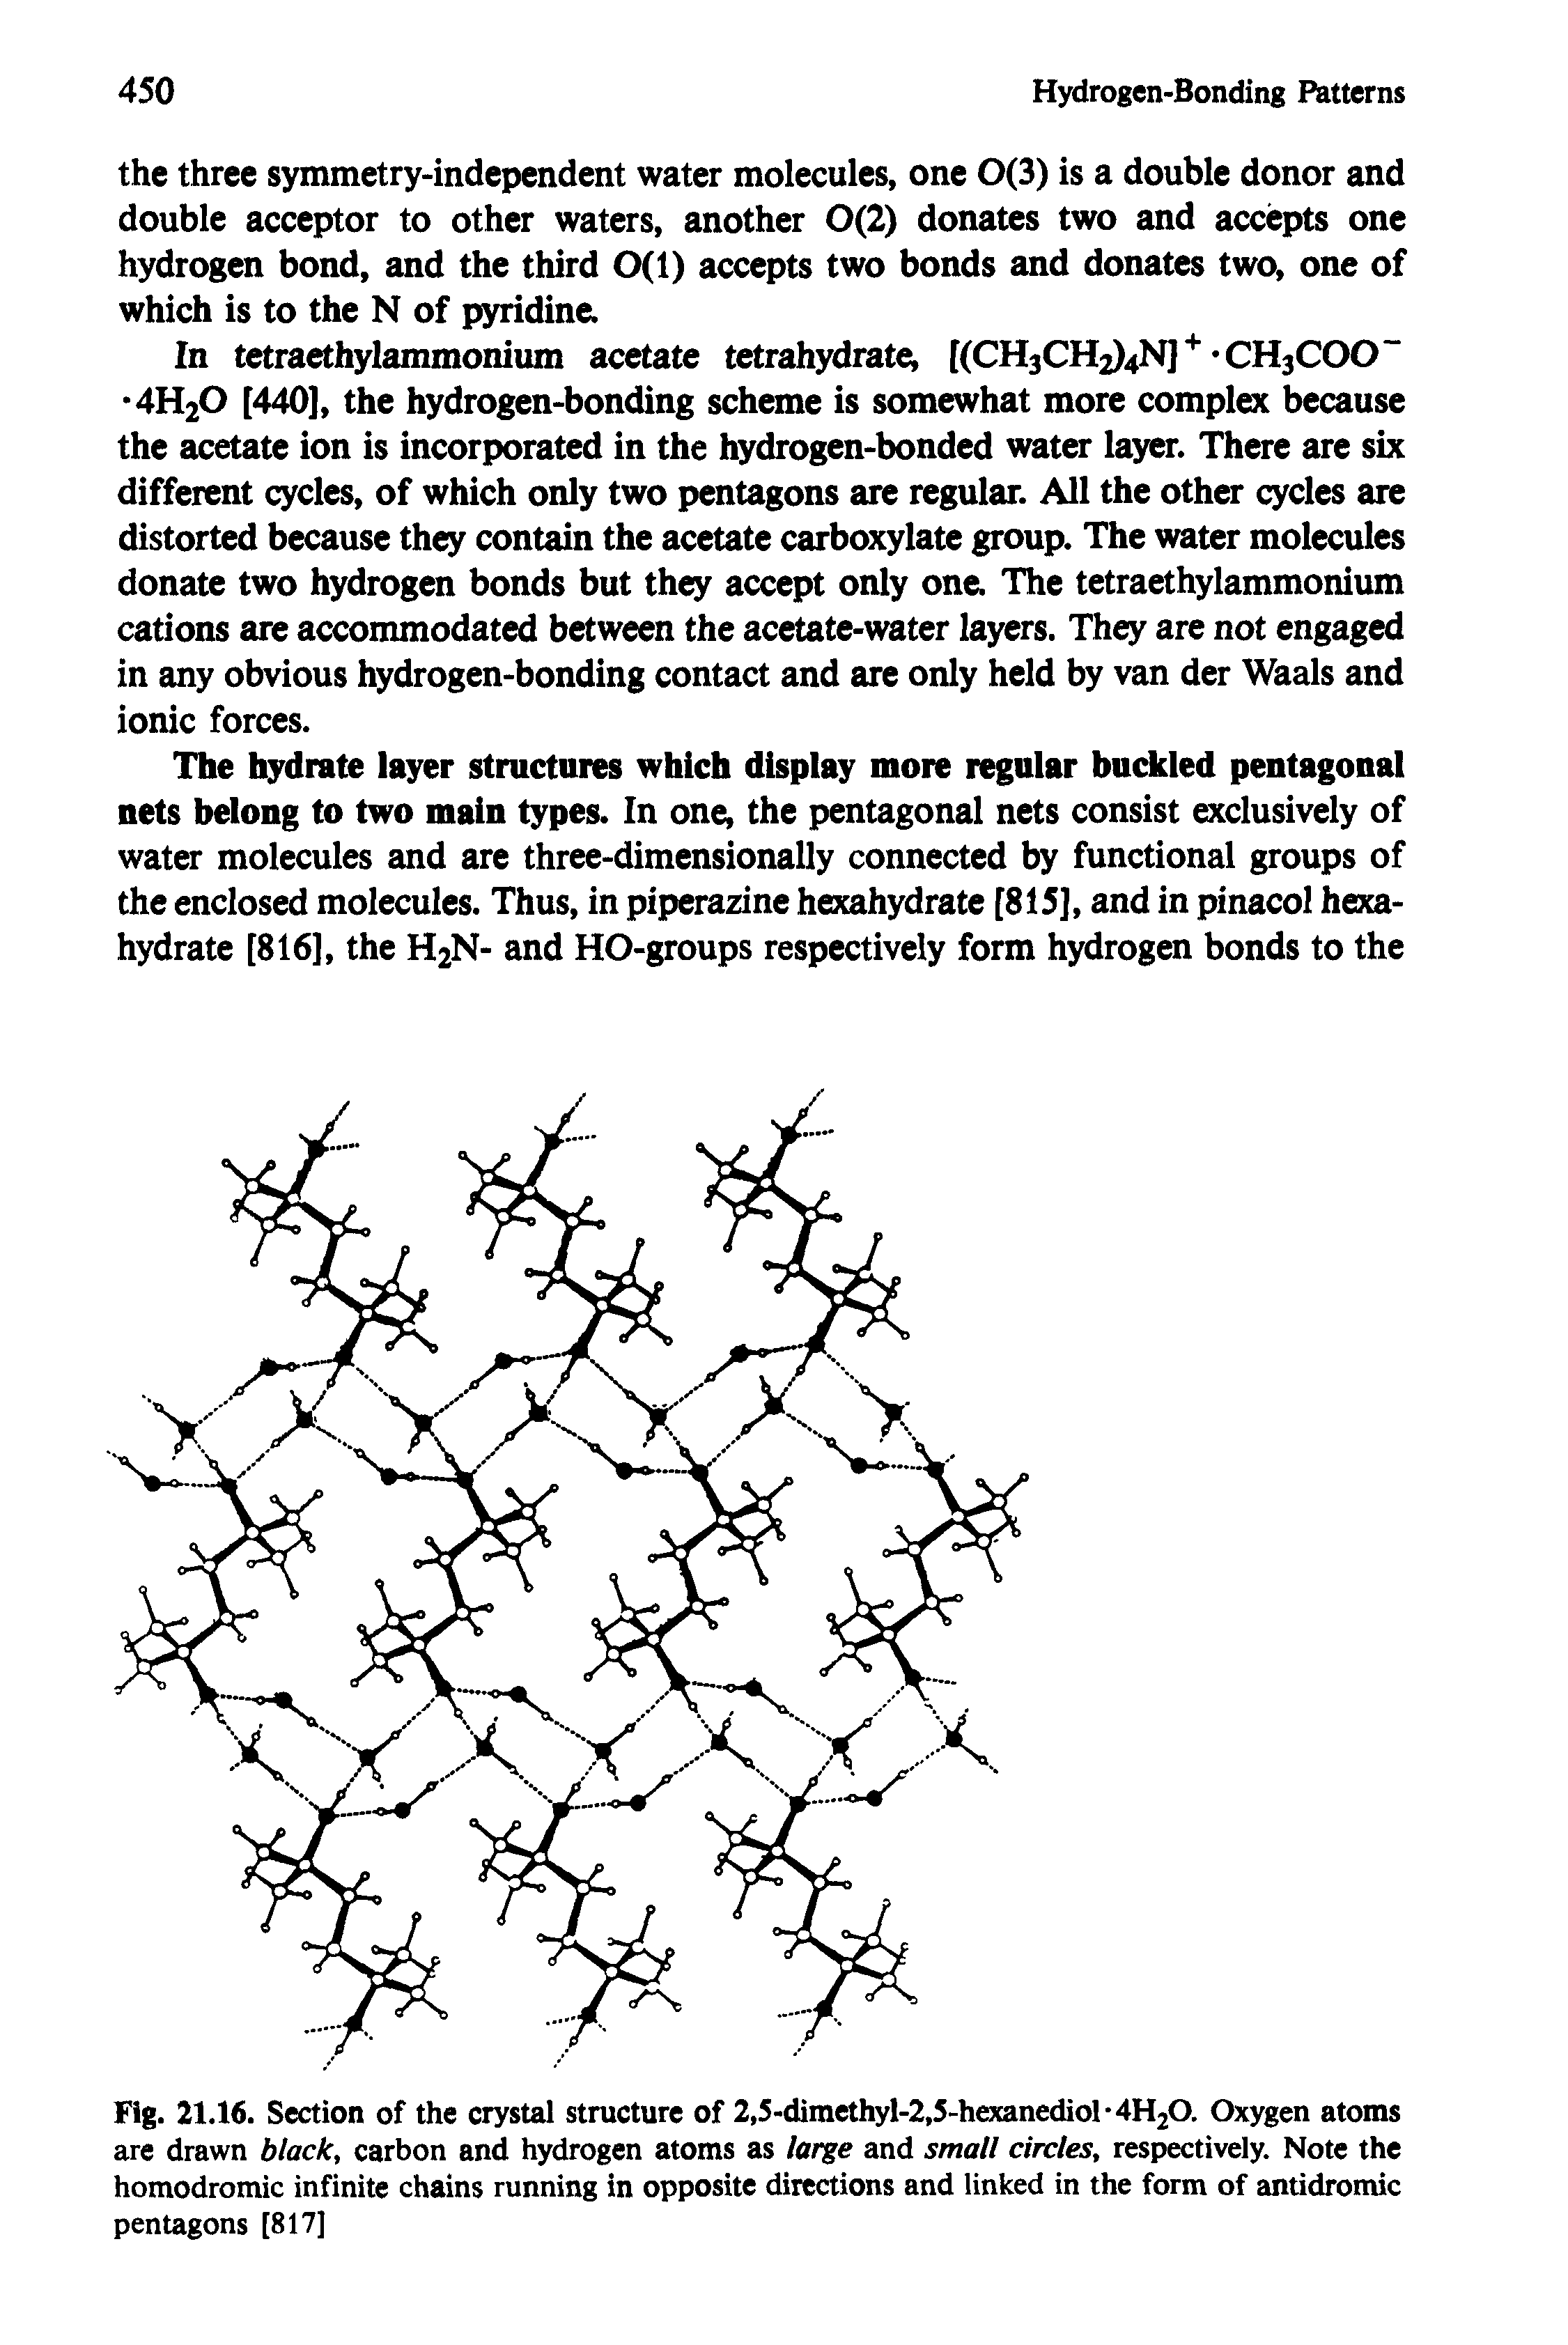 Fig. 21.16. Section of the crystal structure of 2,5-dimethyl-2,5-hexanediol-4H20. Oxygen atoms are drawn black, carbon and hydrogen atoms as large and small circles, respectively. Note the homodromic infinite chains running in opposite directions and linked in the form of antidromic pentagons [817]...